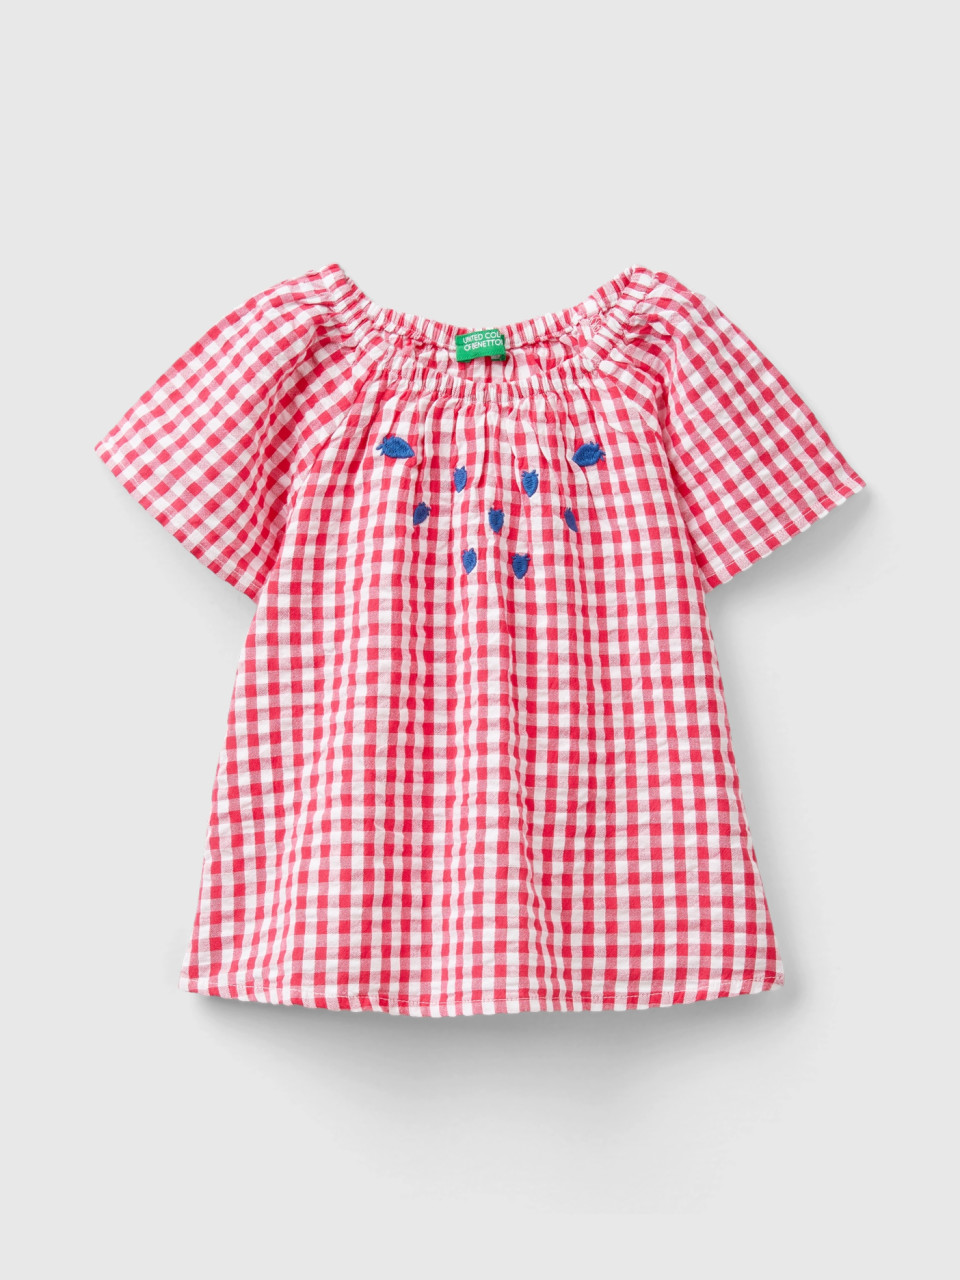 Benetton, Vichy Shirt With Embroidery, Red, Kids